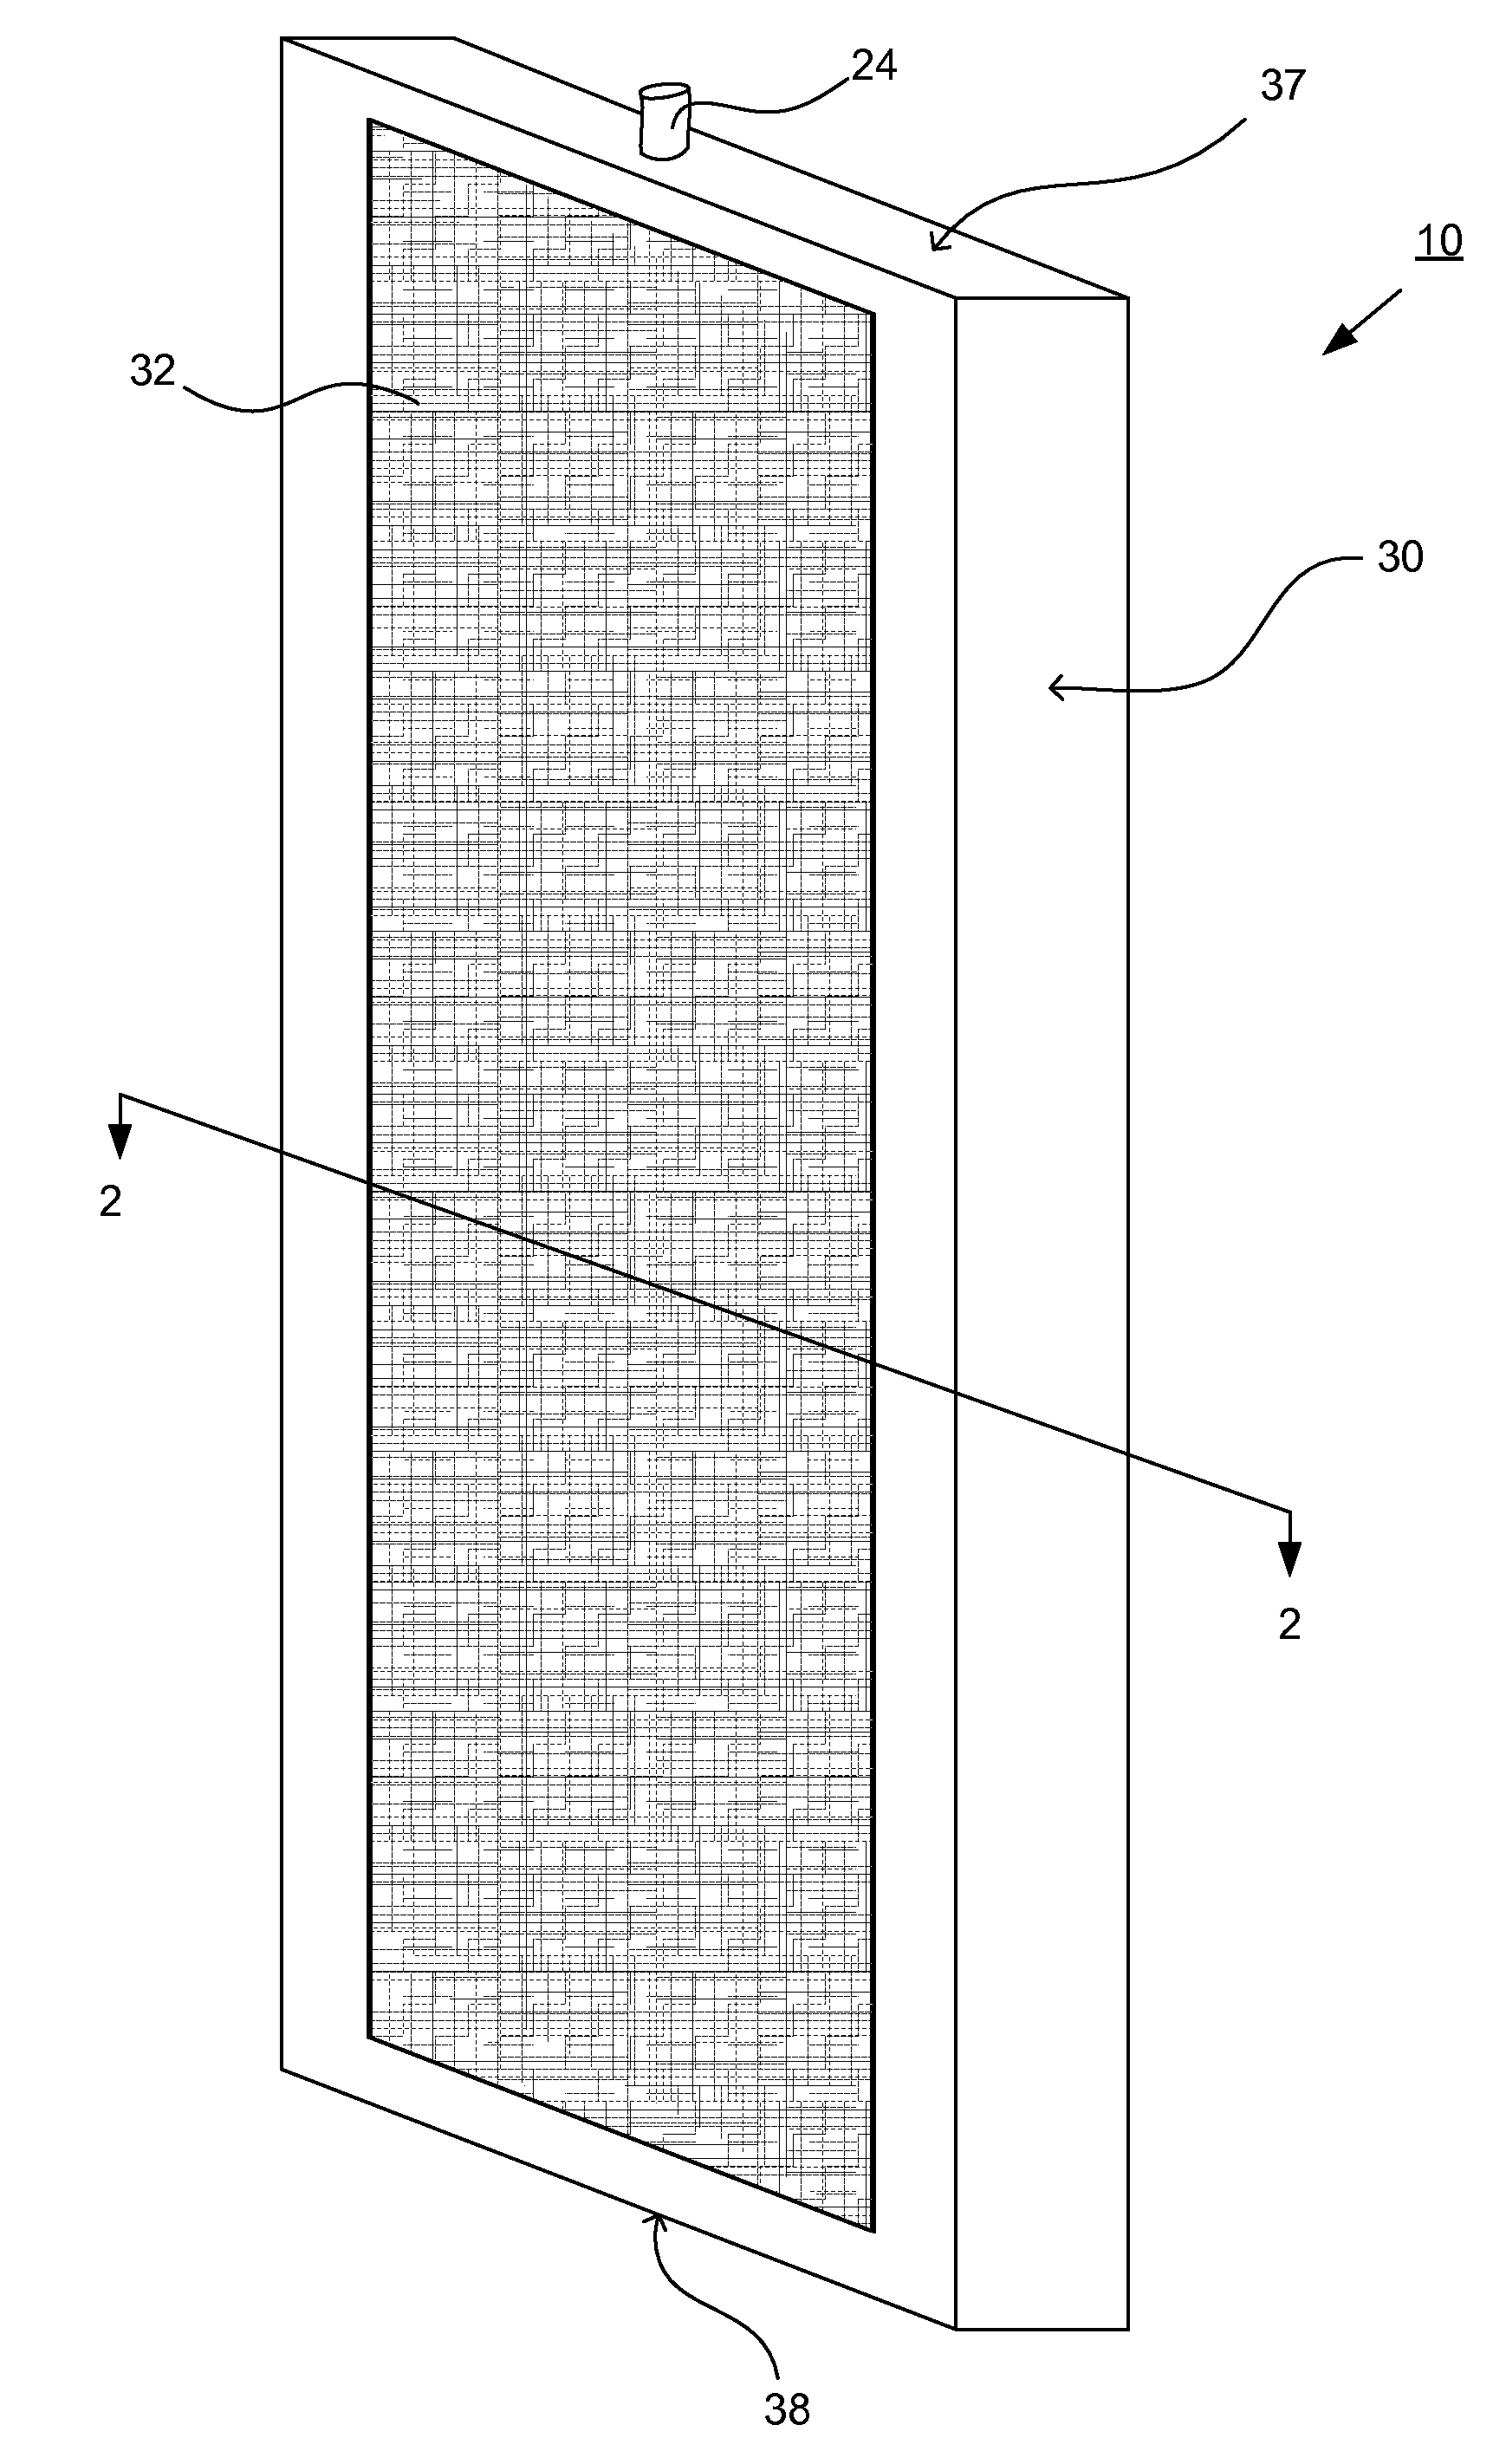 System for solar heating water using a glass absorber